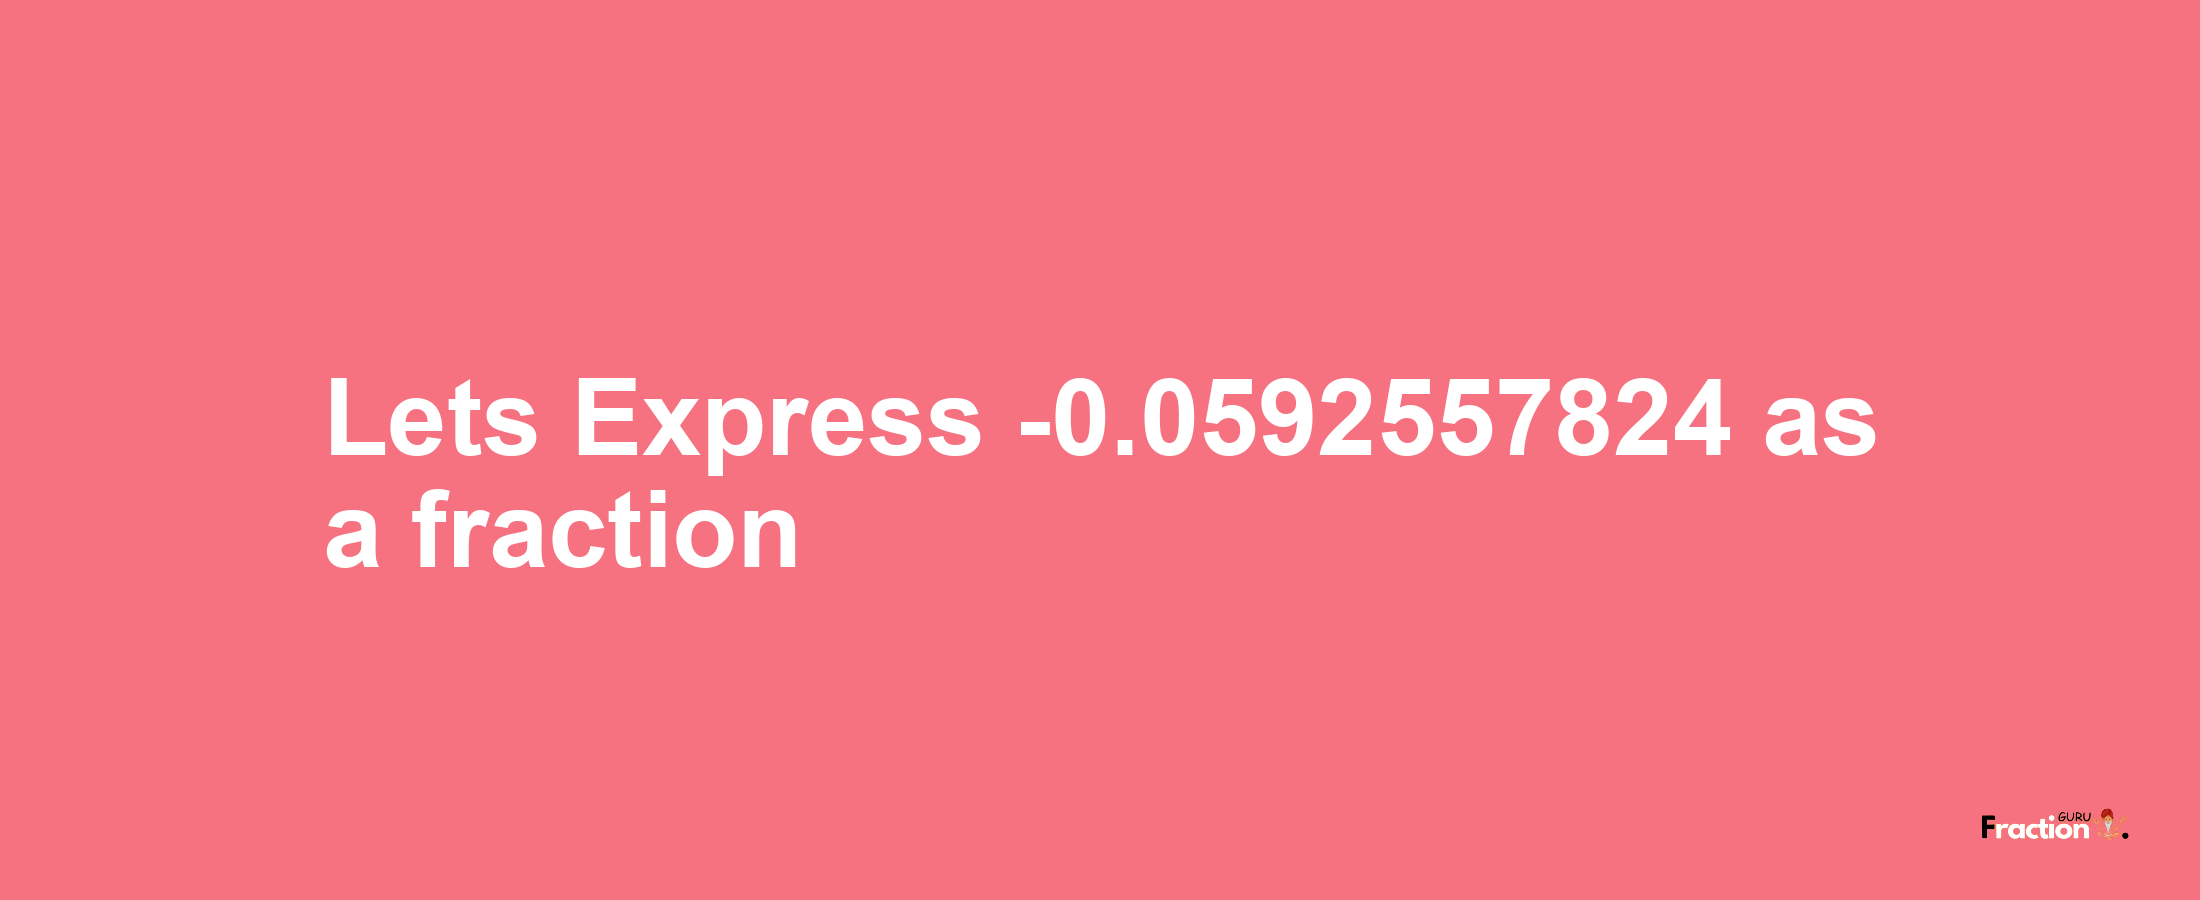 Lets Express -0.0592557824 as afraction